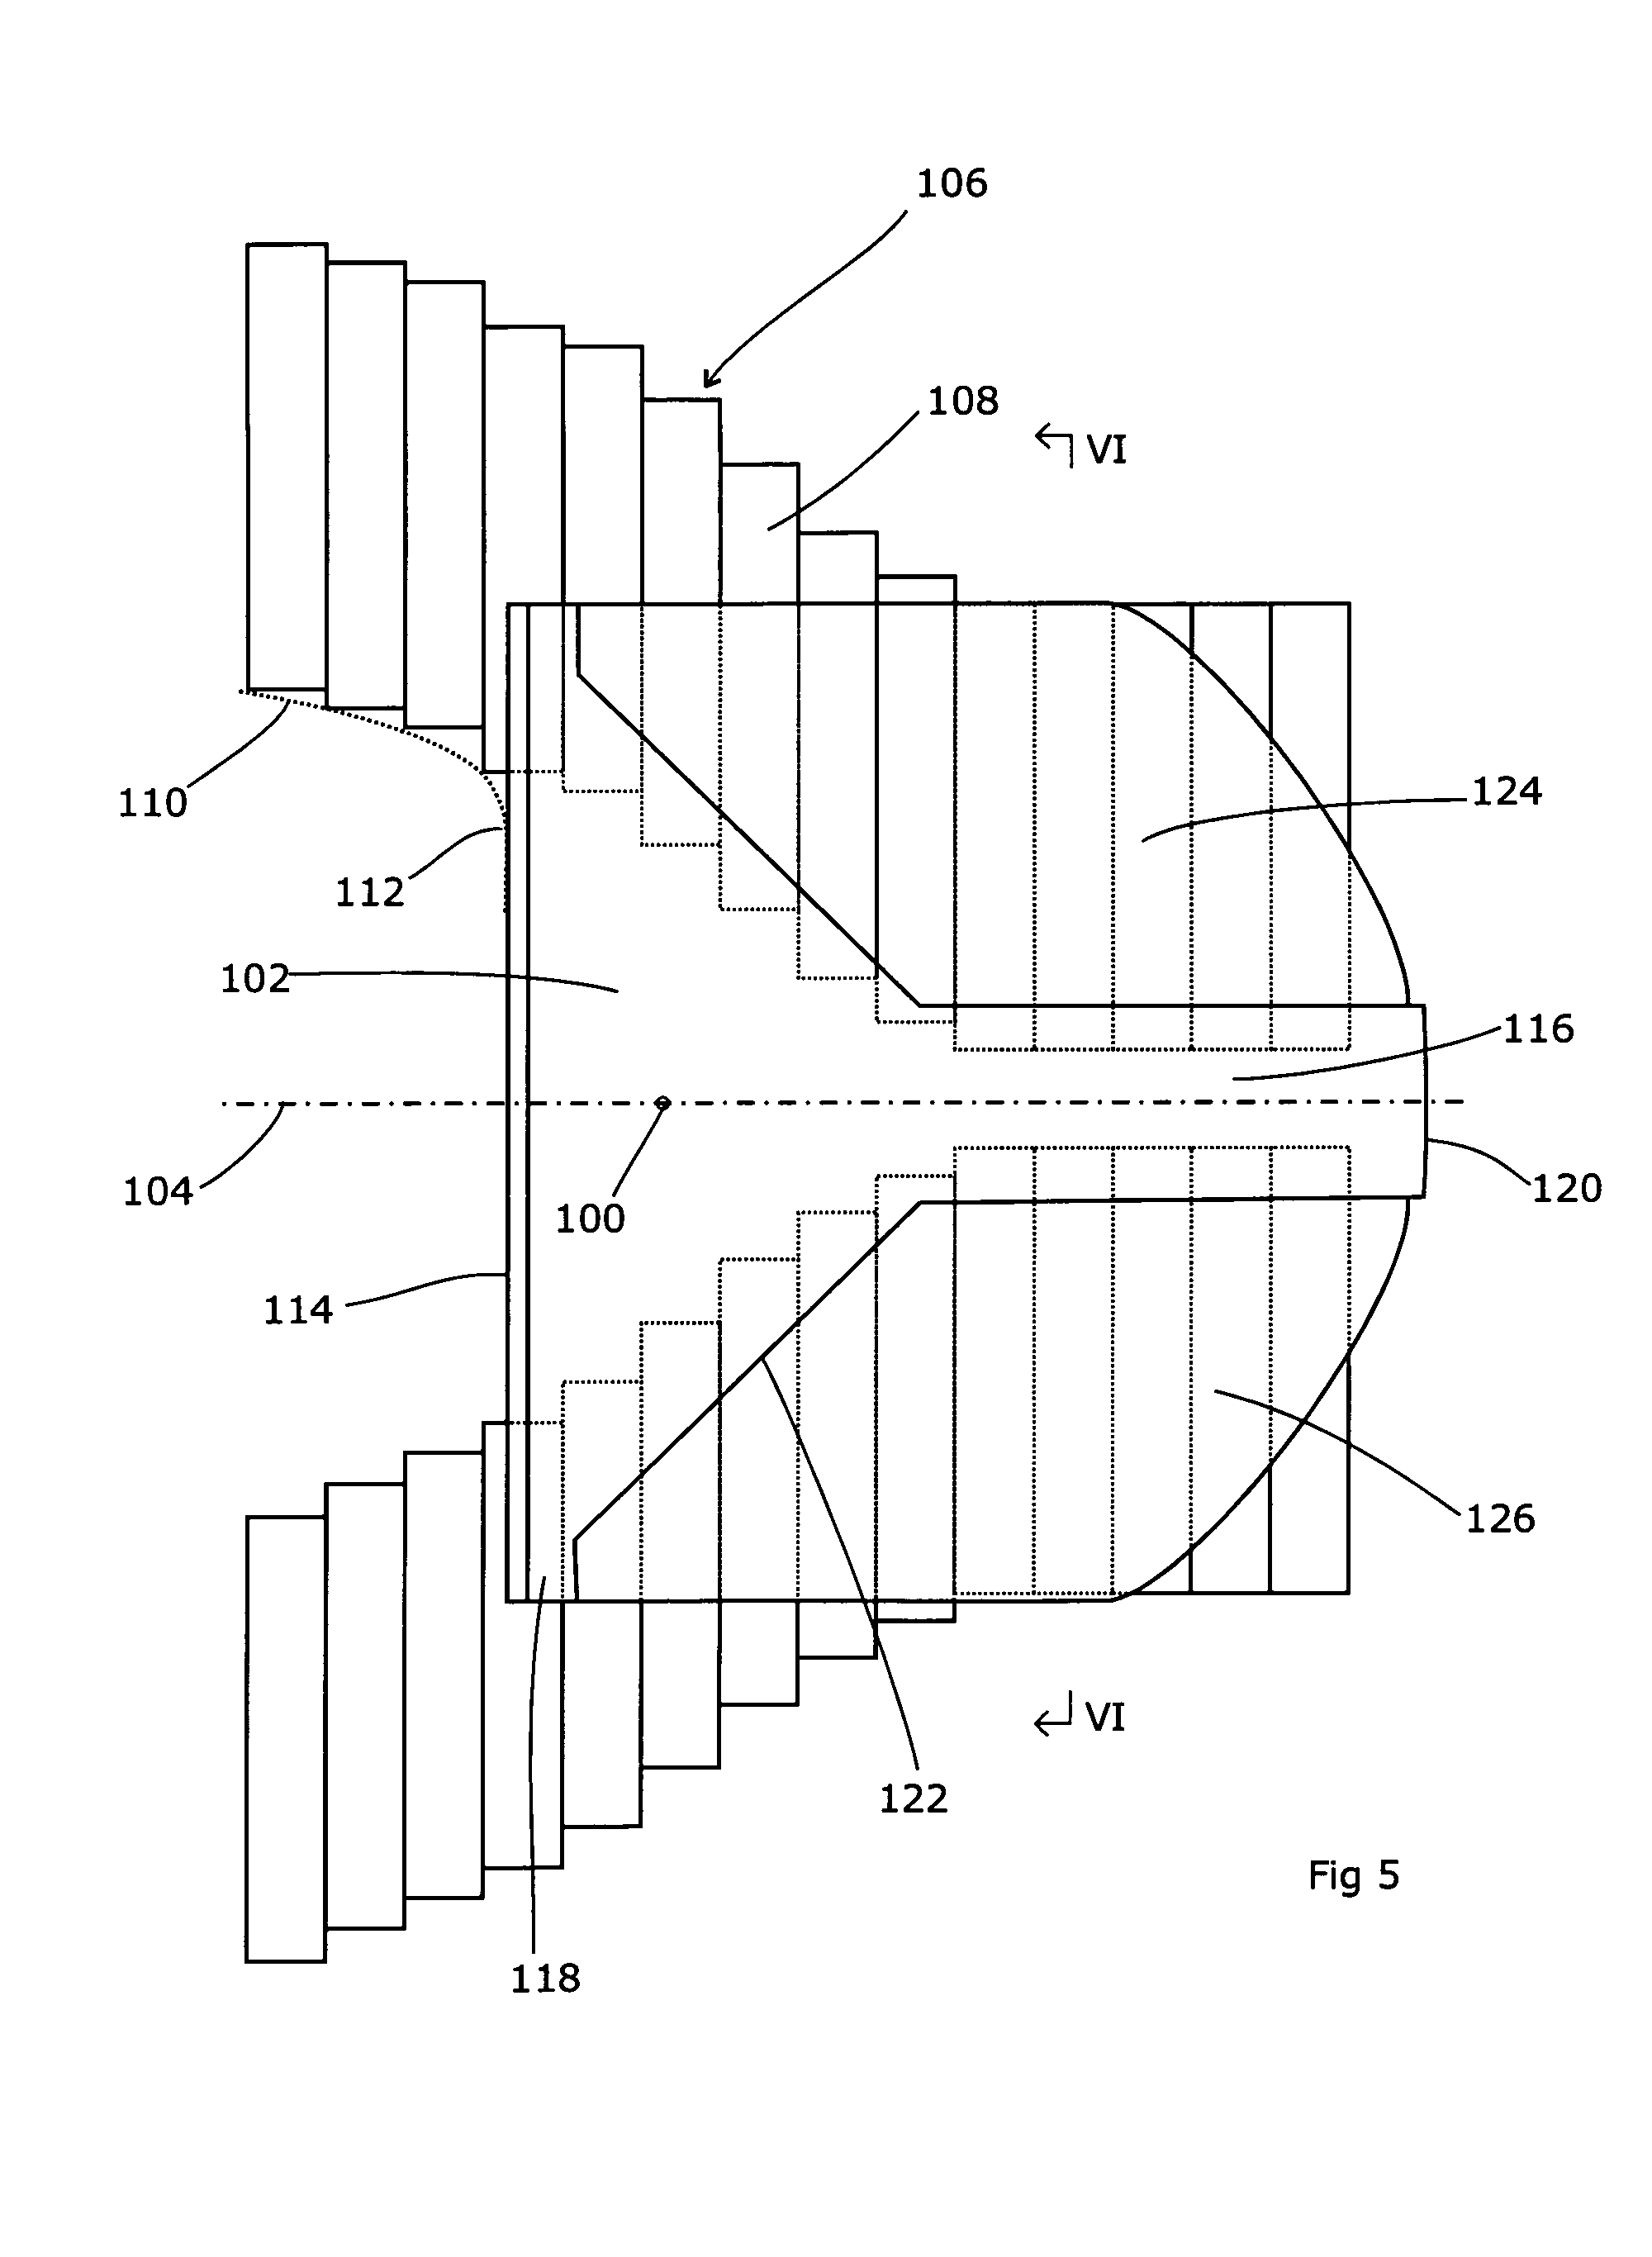 Collimation apparatus for radiotherapy